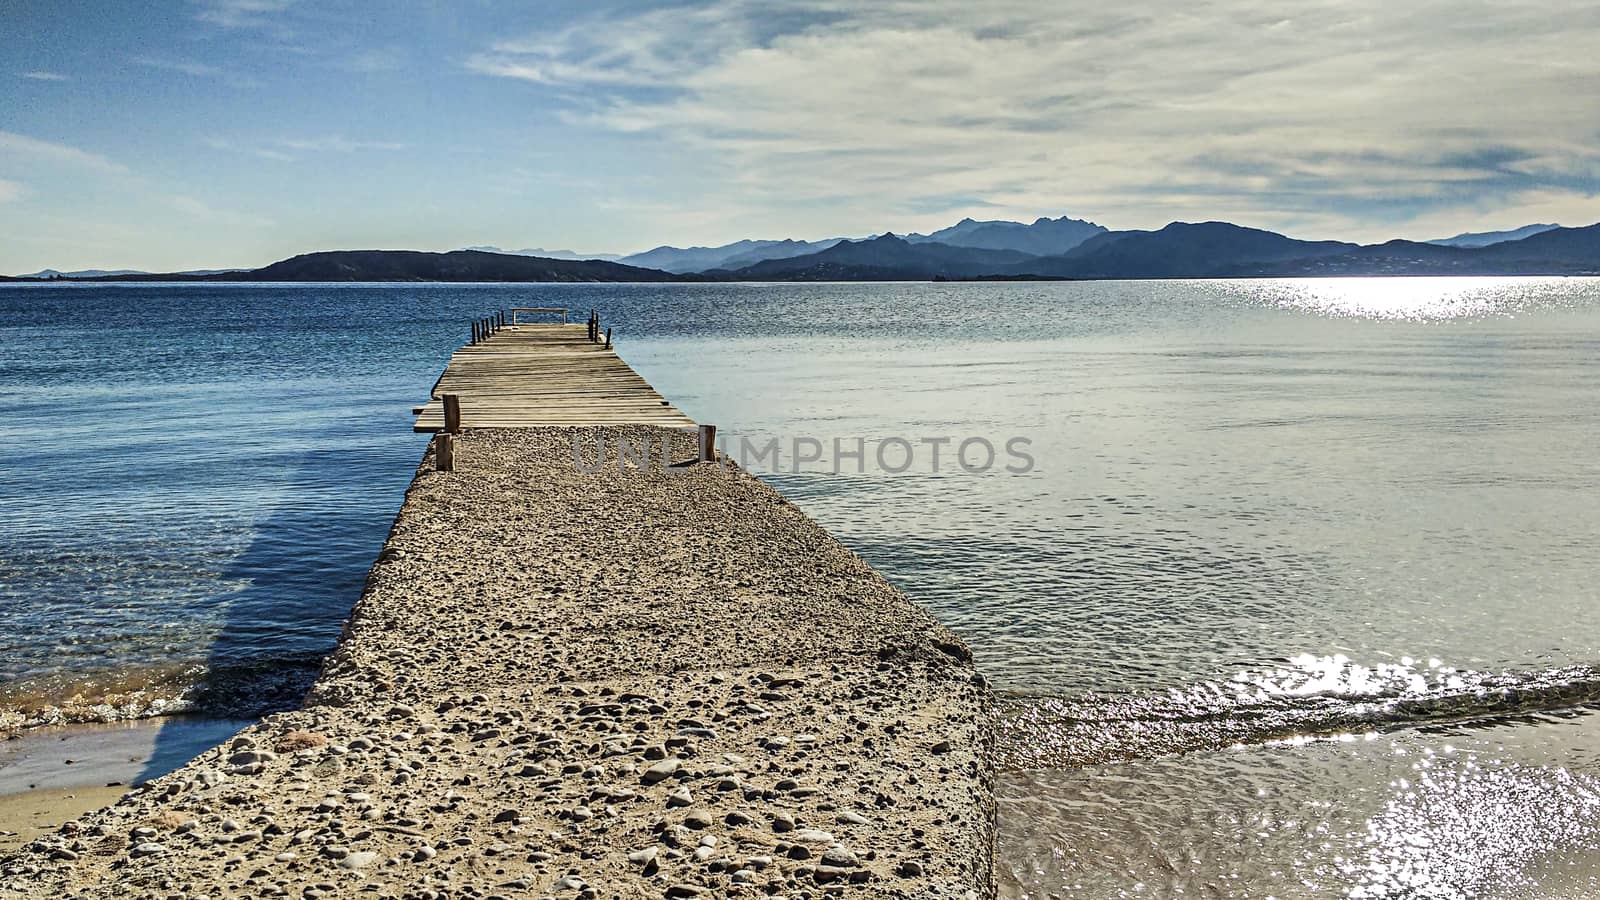 An old little pier proceeds for a few meters on the calm waters of the island of Tavolara in the colors of the Sardinian sea